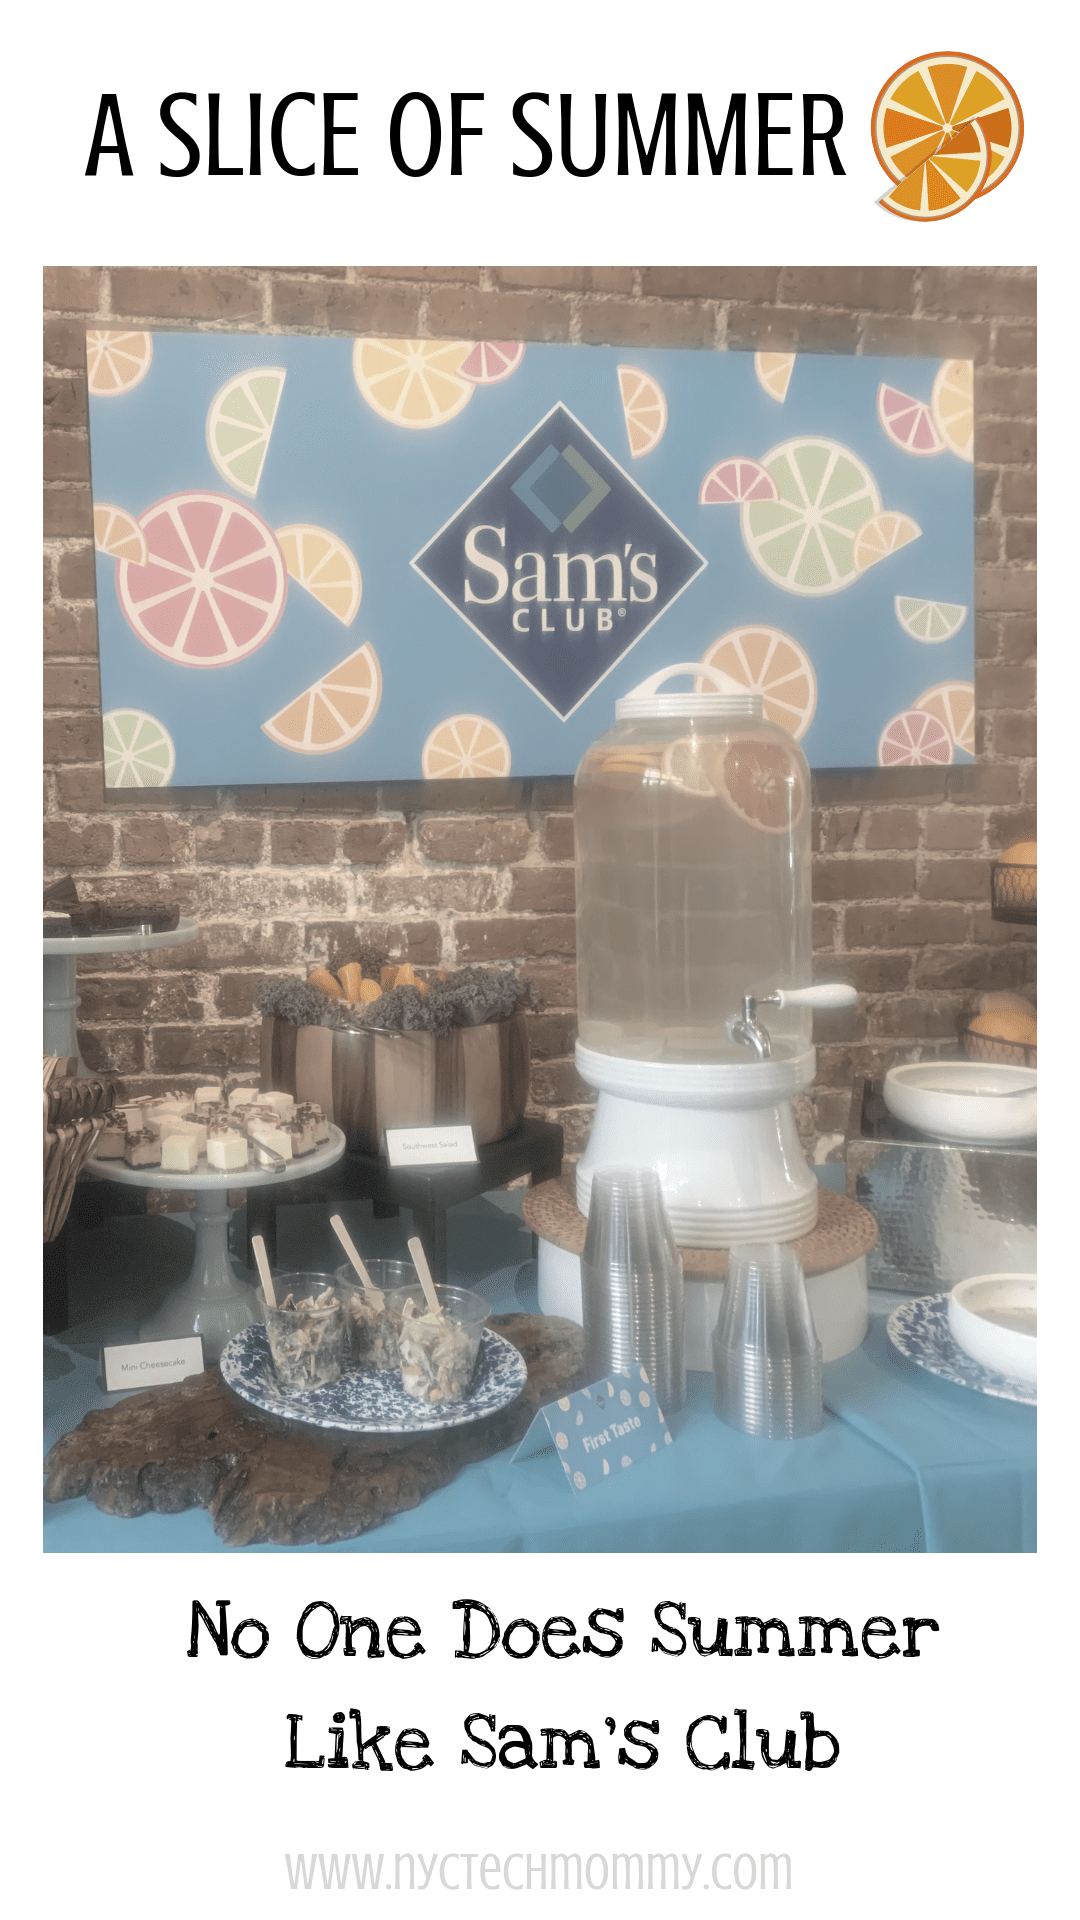 No one does summer like Sam's Club  - here's all the summer gear and summer treats you'll need for dinning al fresco or hosting that summer soiree  #summer #summerparty #samsclub #sliceofsummer